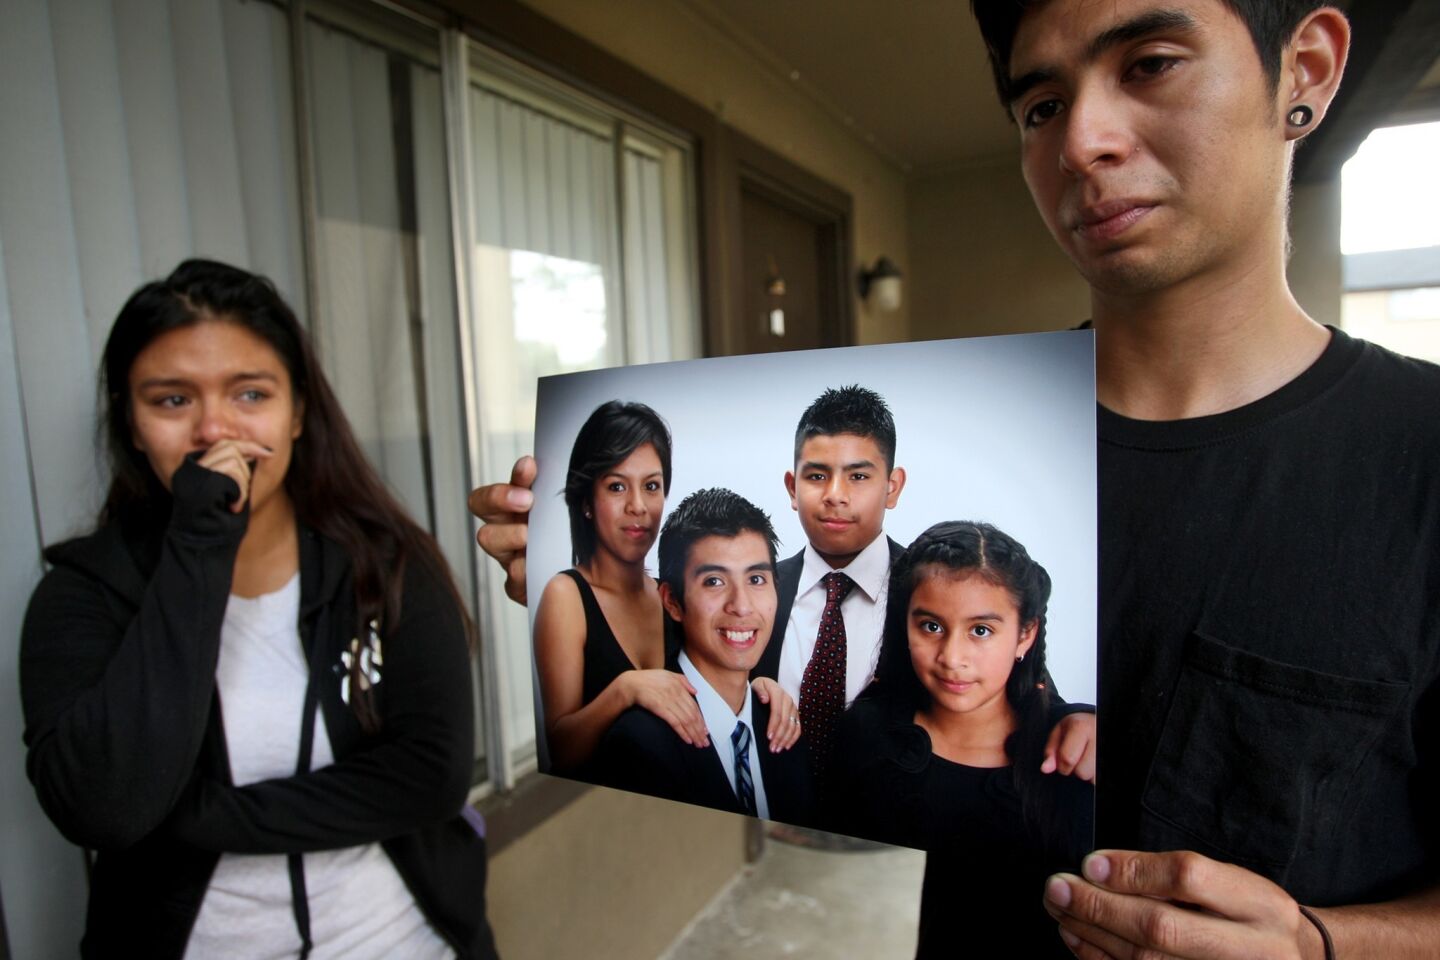 Brenda Gonzalez, 24, left, sobs as her 21-year-old brother holds a photo of their siblings. Hit-and-run victim Andrea Gonzalez, 13, is seen at right.